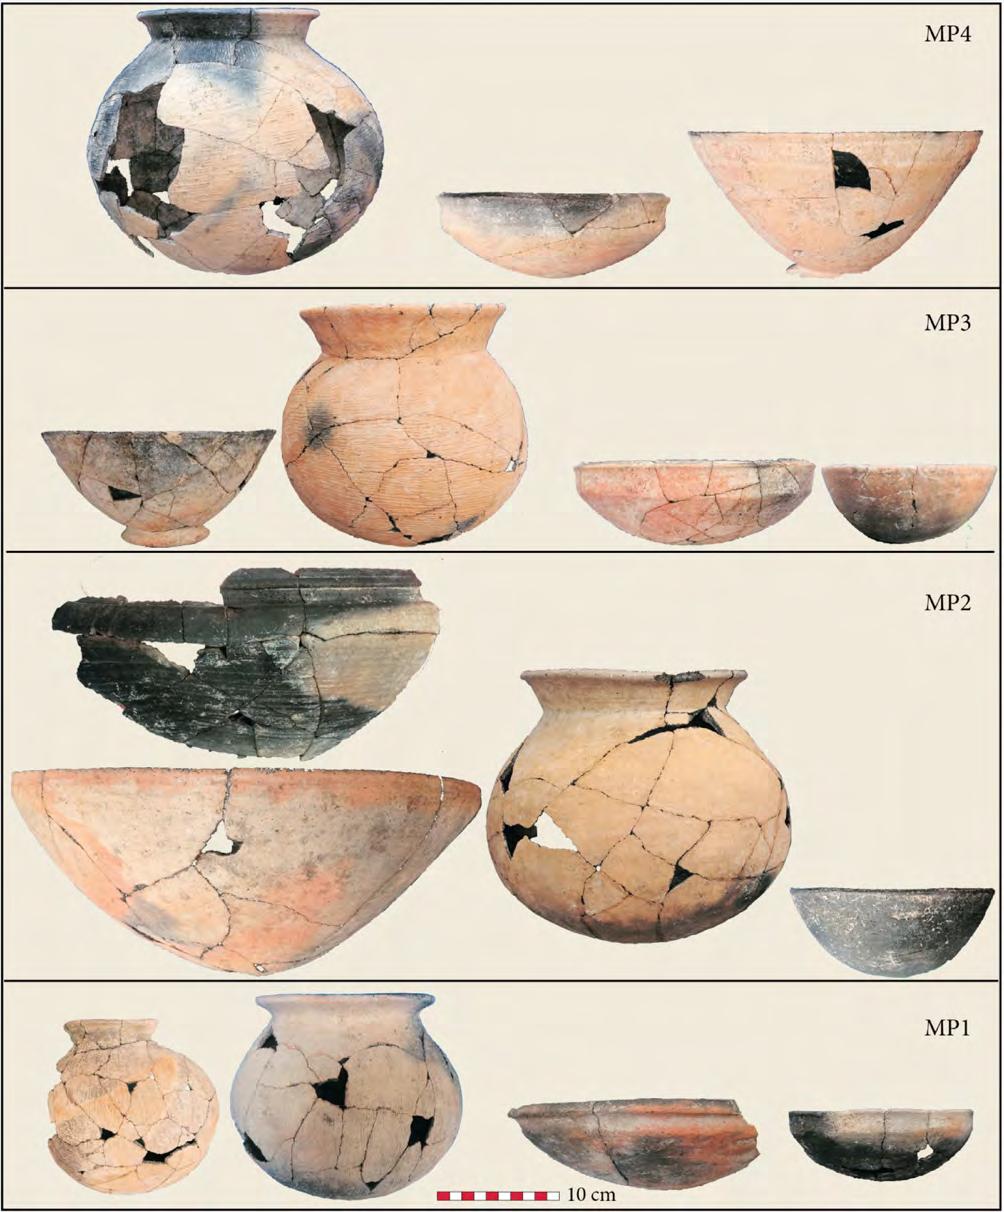 HIGHAM ET AL.: THE EXCAVATION OF NON BAN JAK, NORTHEAST THAILAND - A REPORT ON THE FIRST THREE SEASONS Figure 28: Ceramic vessels from adult burials.